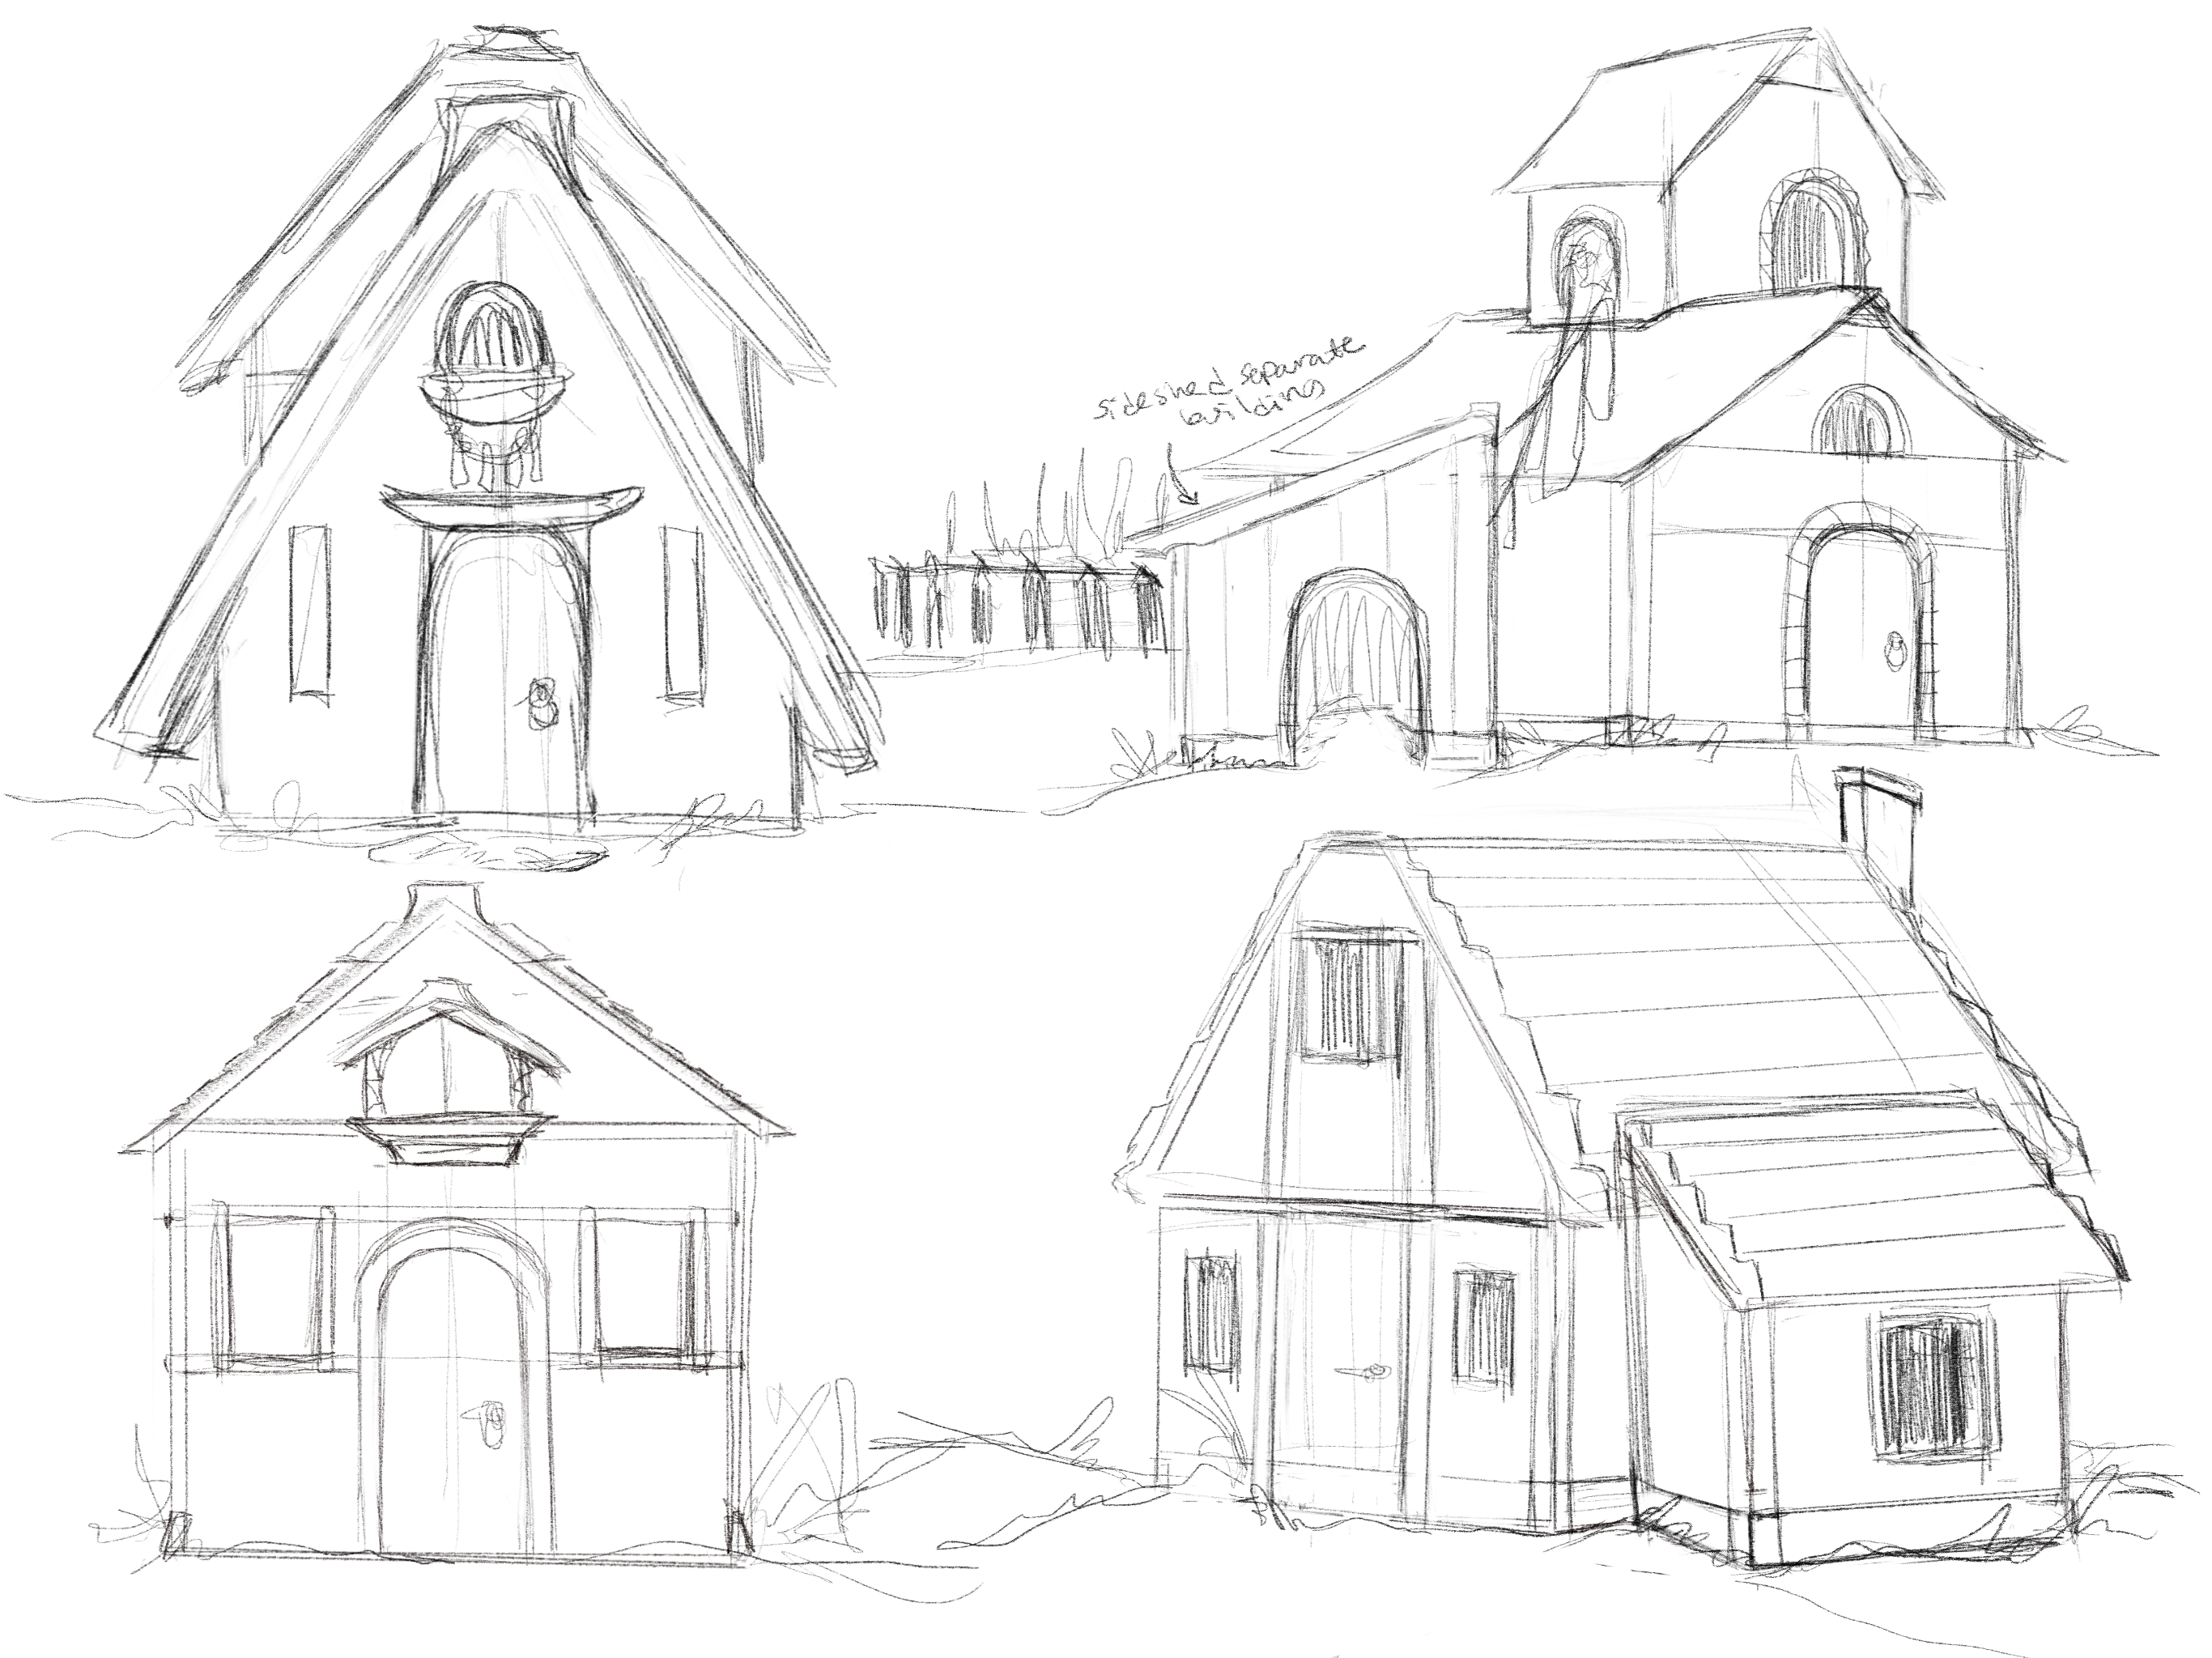 Initial Building Concepts